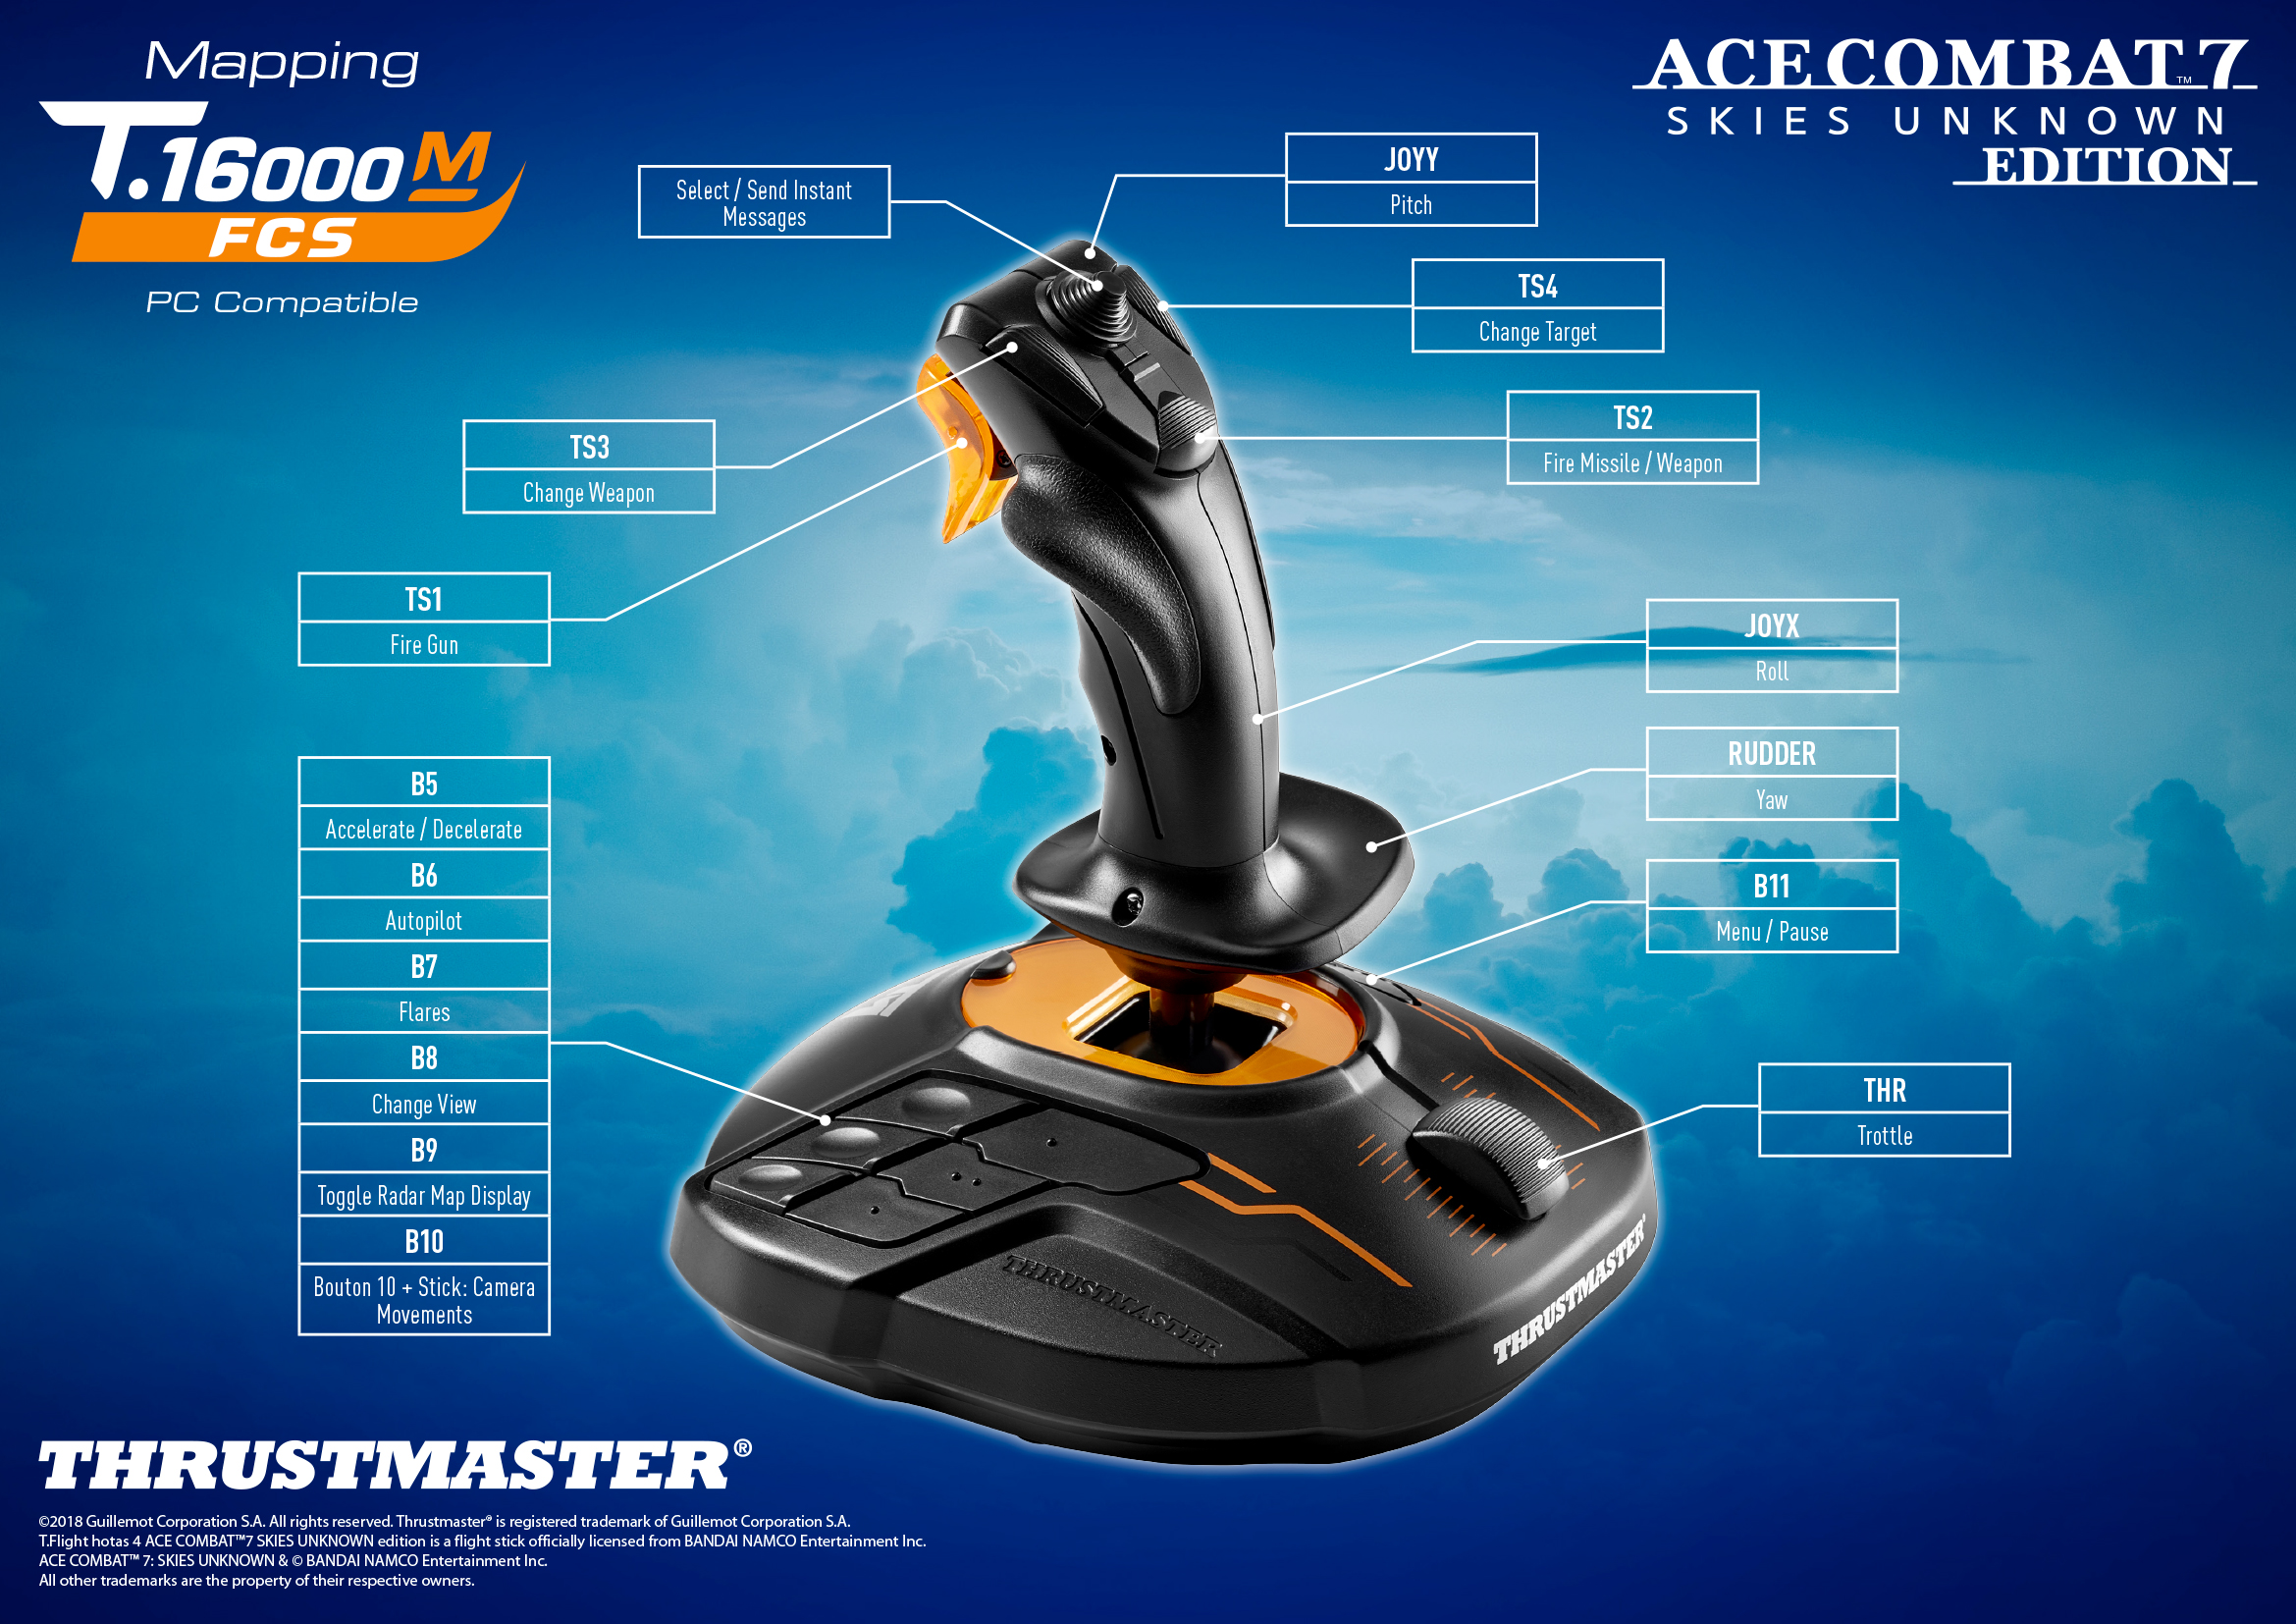 T.16000M FCS - Thrustmaster - Technical support website